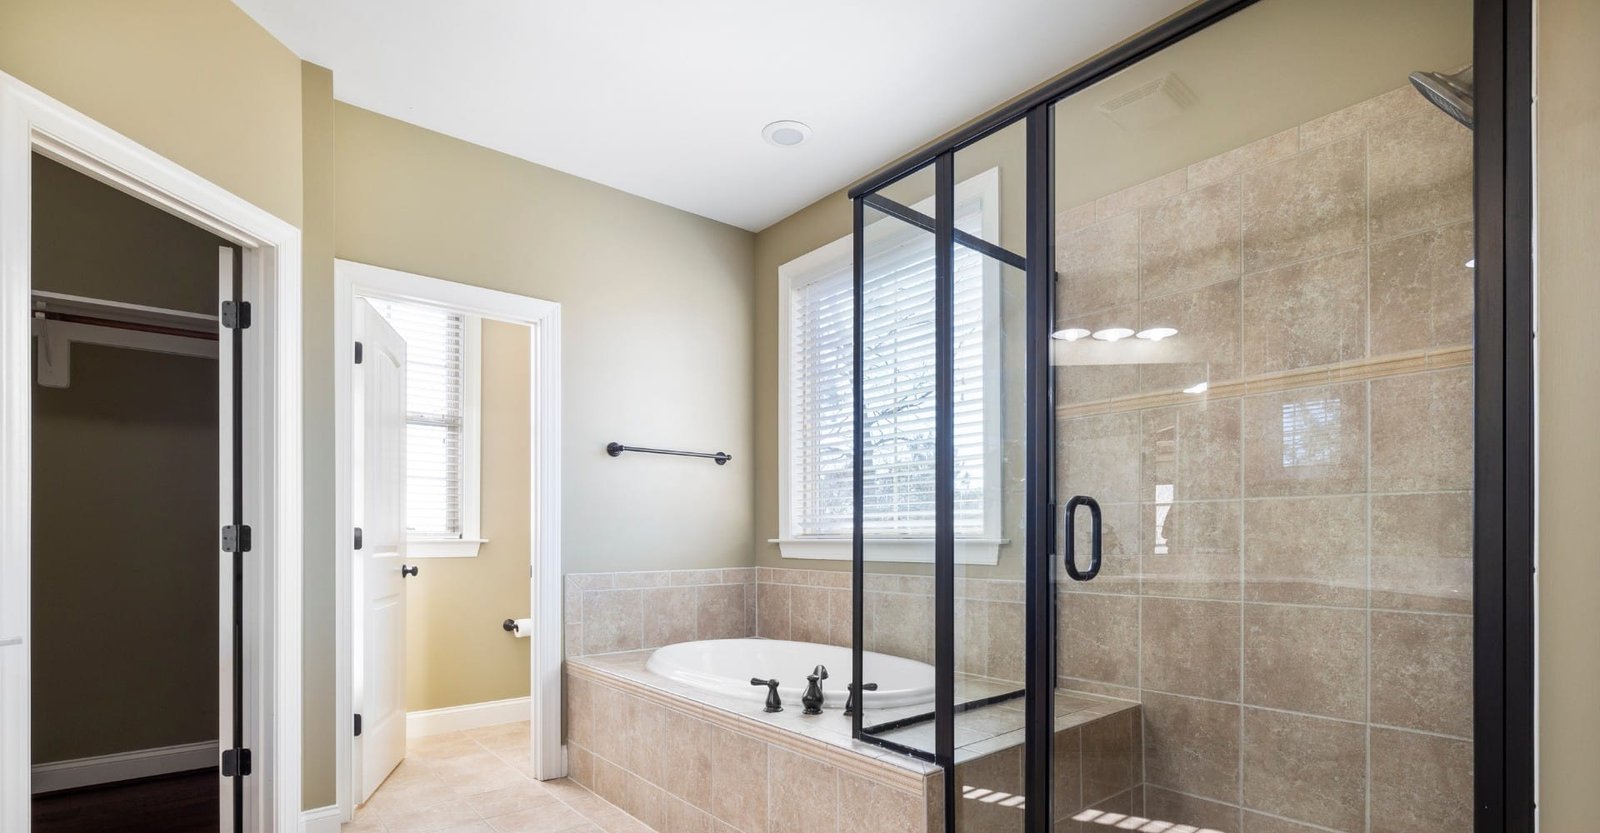 How to remove shower doors? Best Step by Step Guide